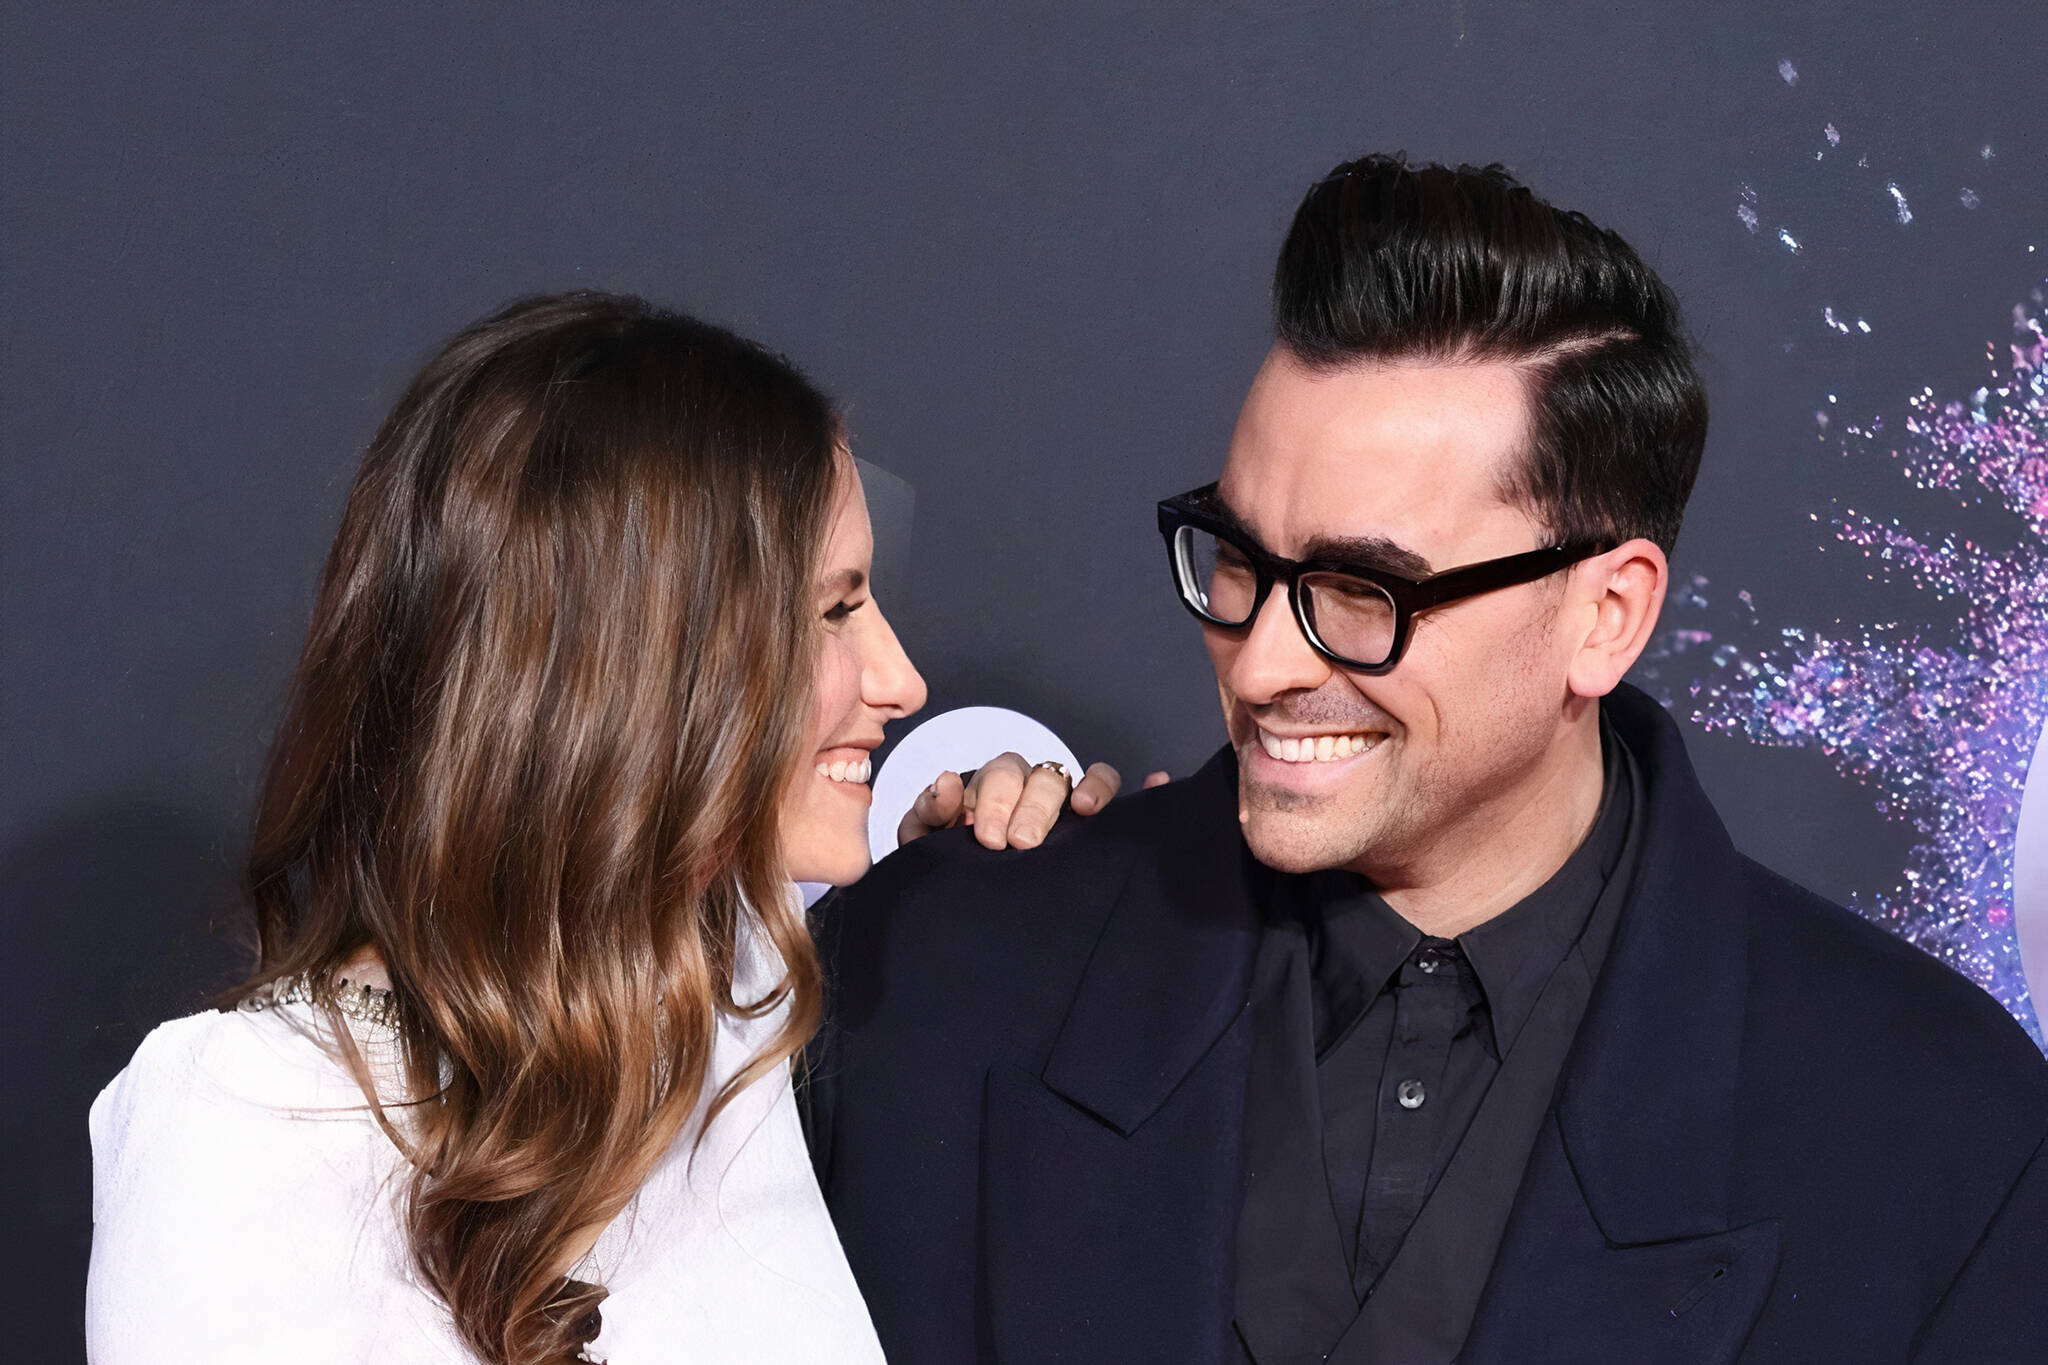 Afslag Hen imod Kirkestol Dan Levy shared an adorable moment from his sister's wedding and fans are  loving it